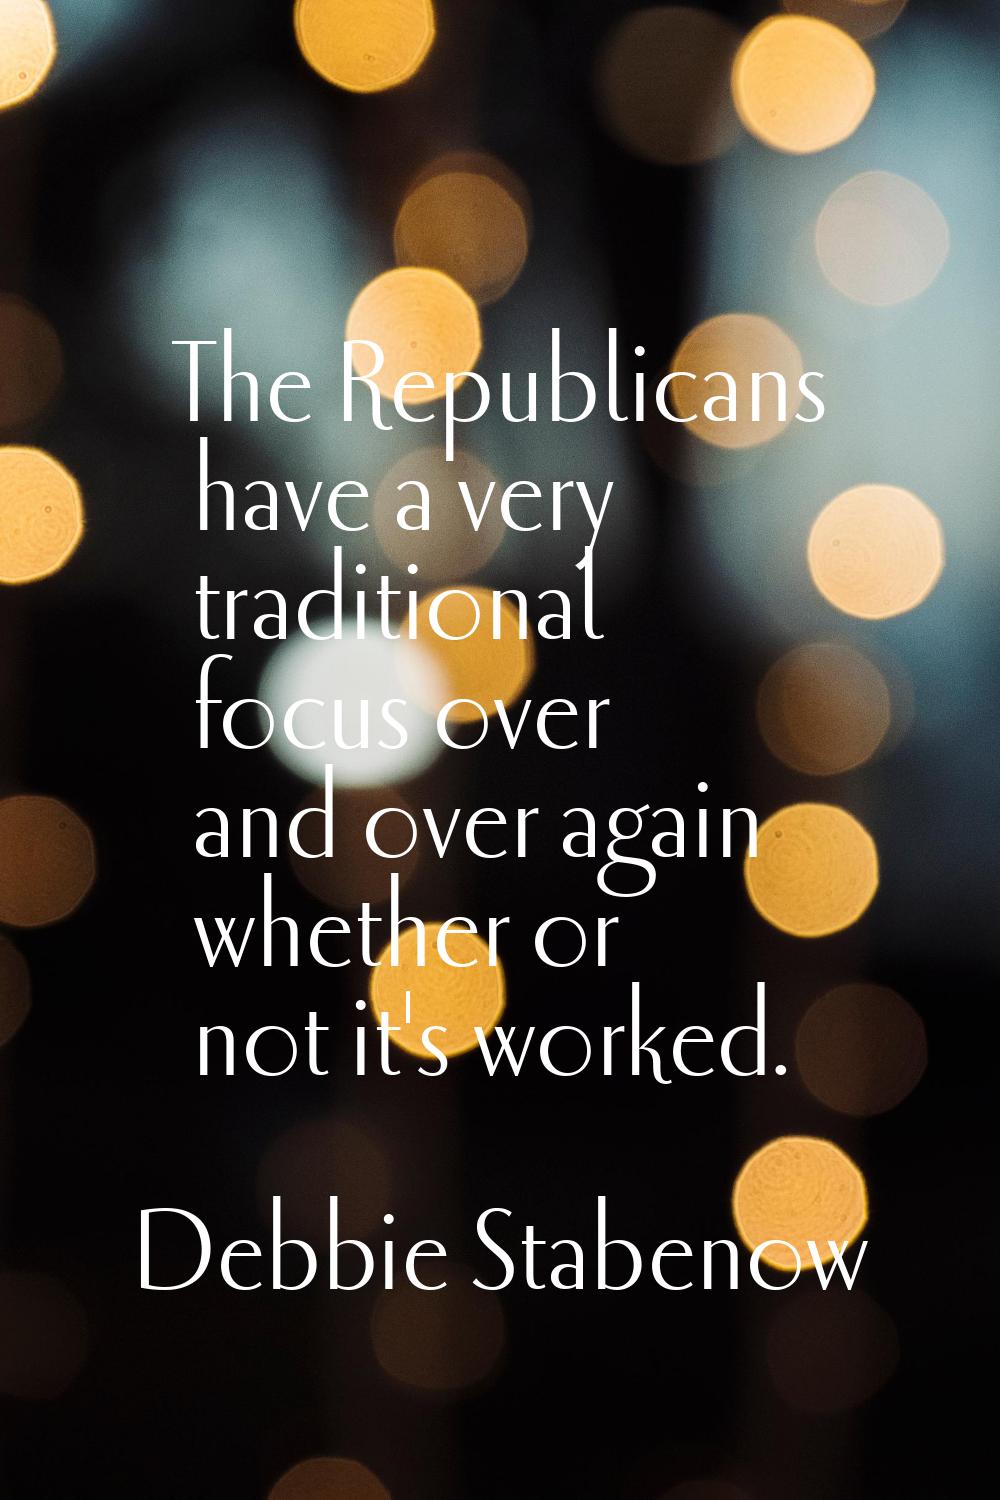 The Republicans have a very traditional focus over and over again whether or not it's worked.